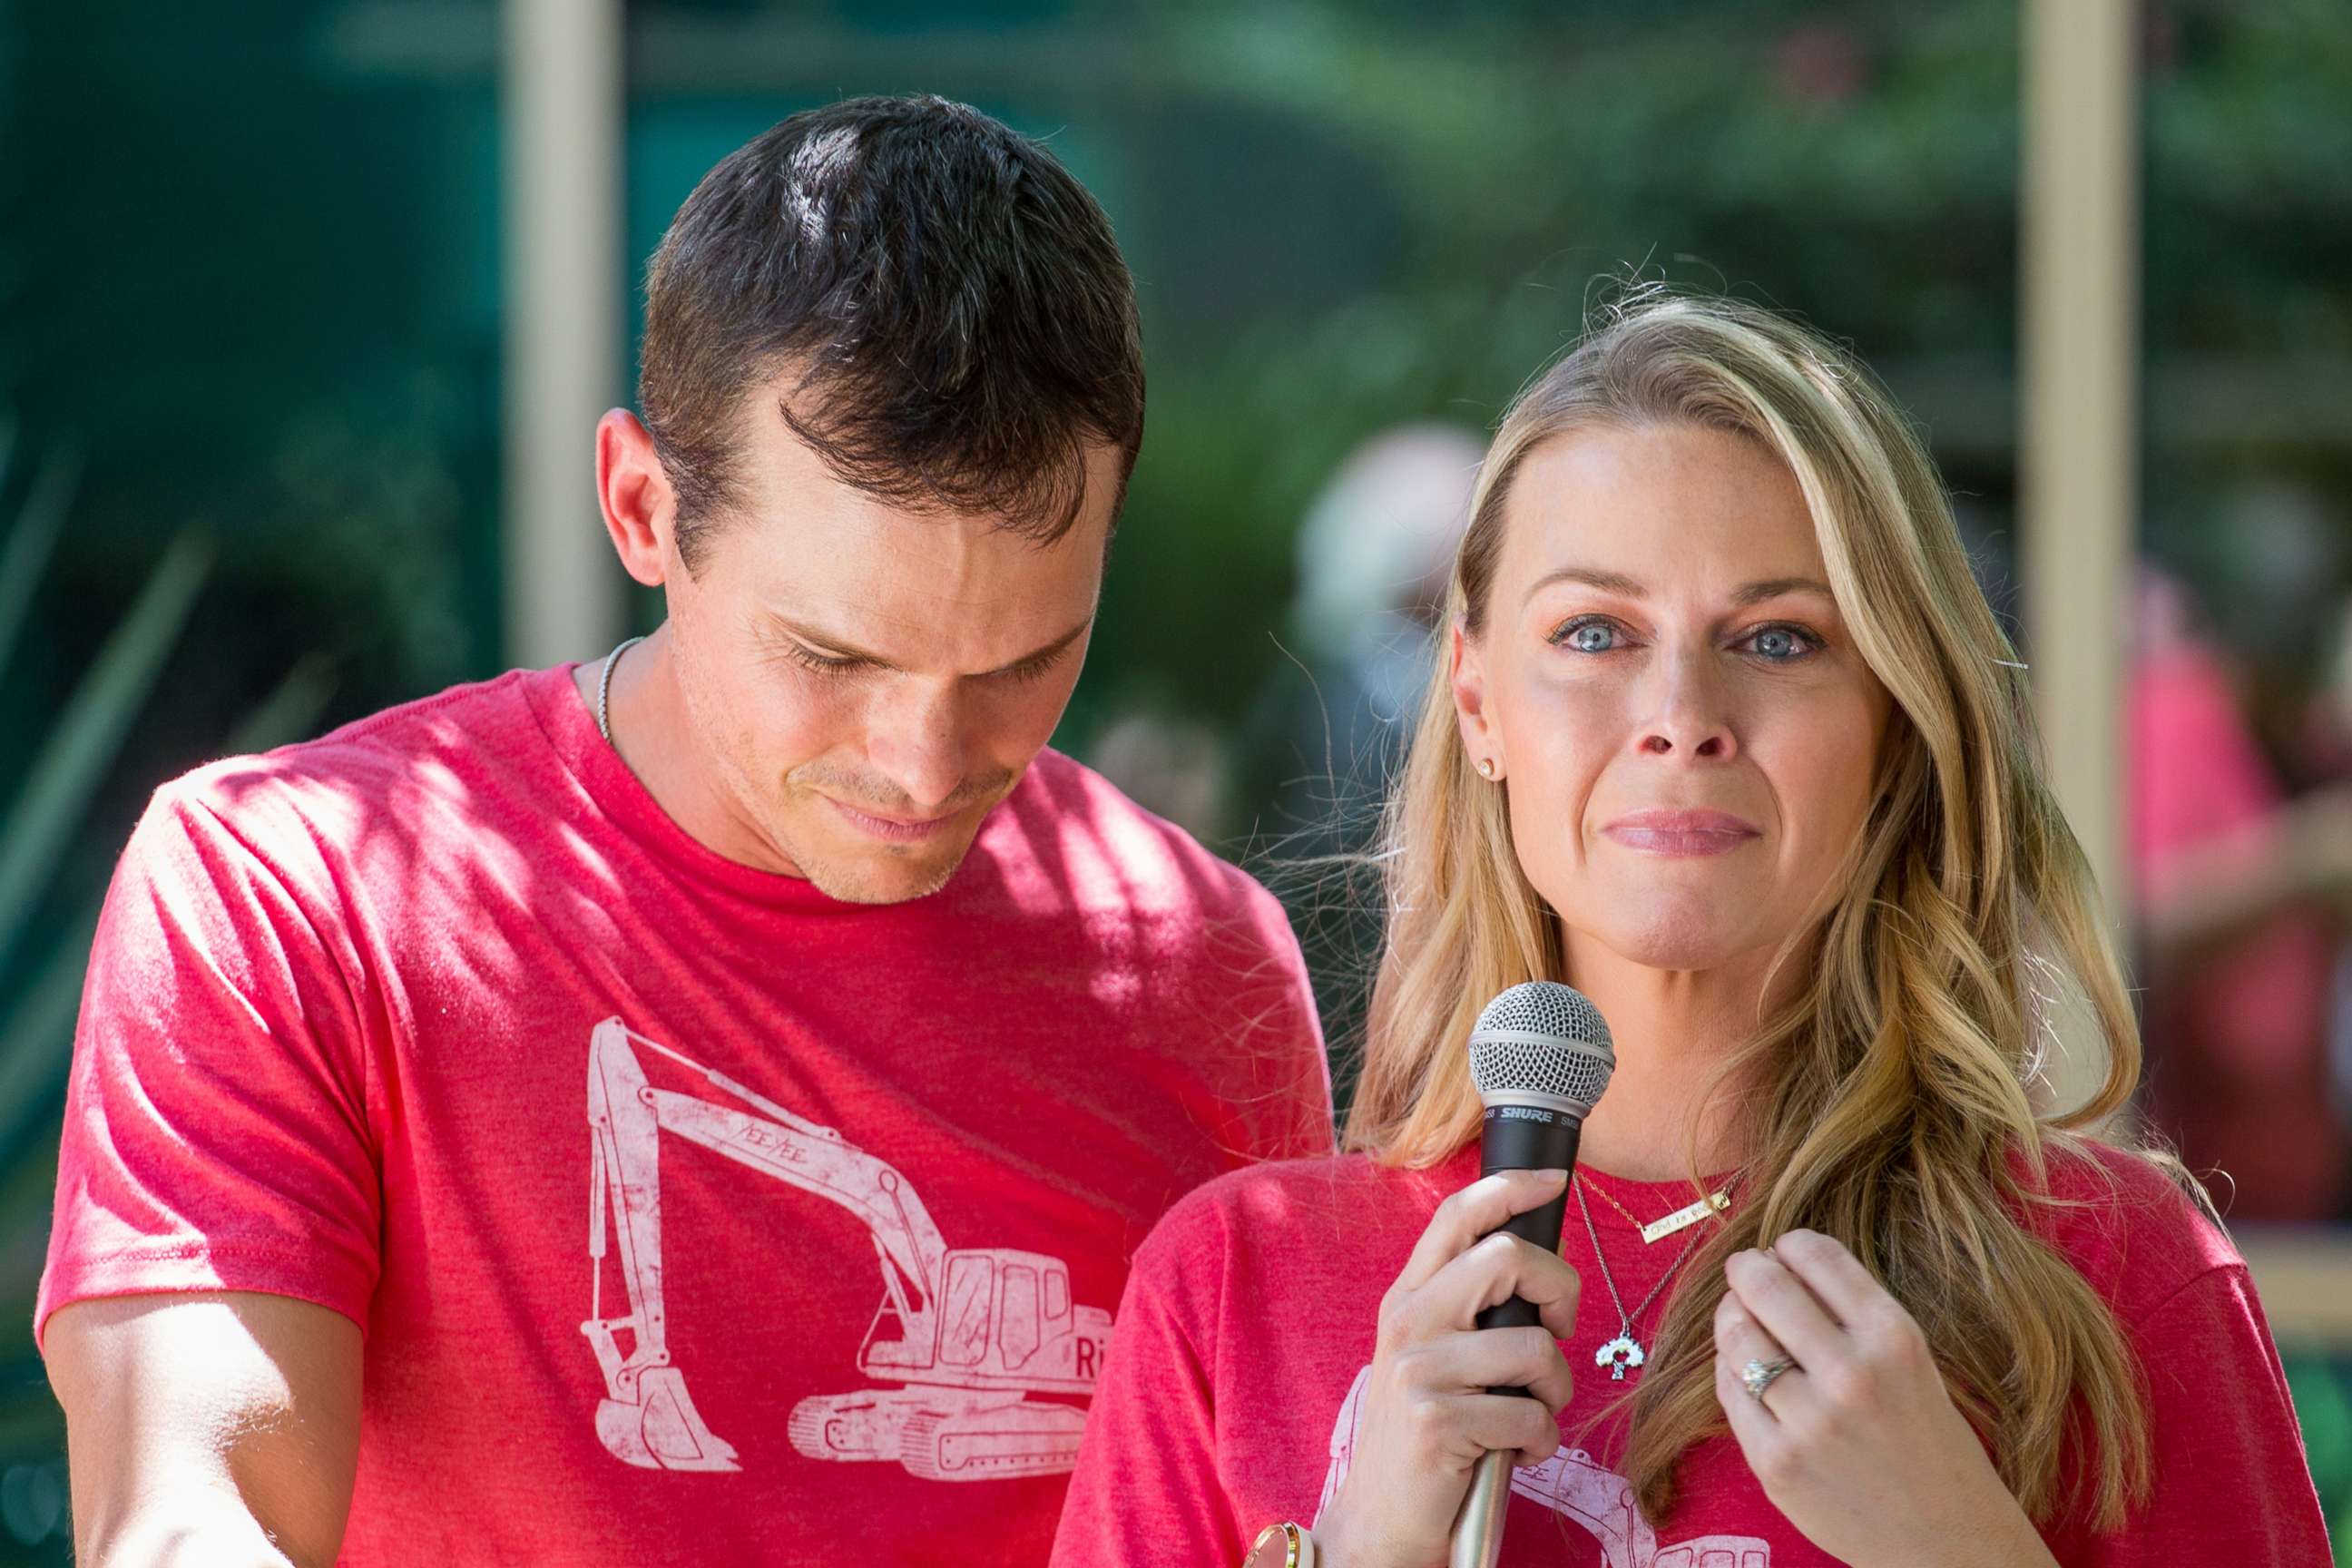 PHOTO: In this June 25, 2019, file photo, Granger Smith and Amber Smith visit Dell Children's Medical Center of Central Texas to present a donation in memory of their son, River Kelly Smith, in Austin, Texas.